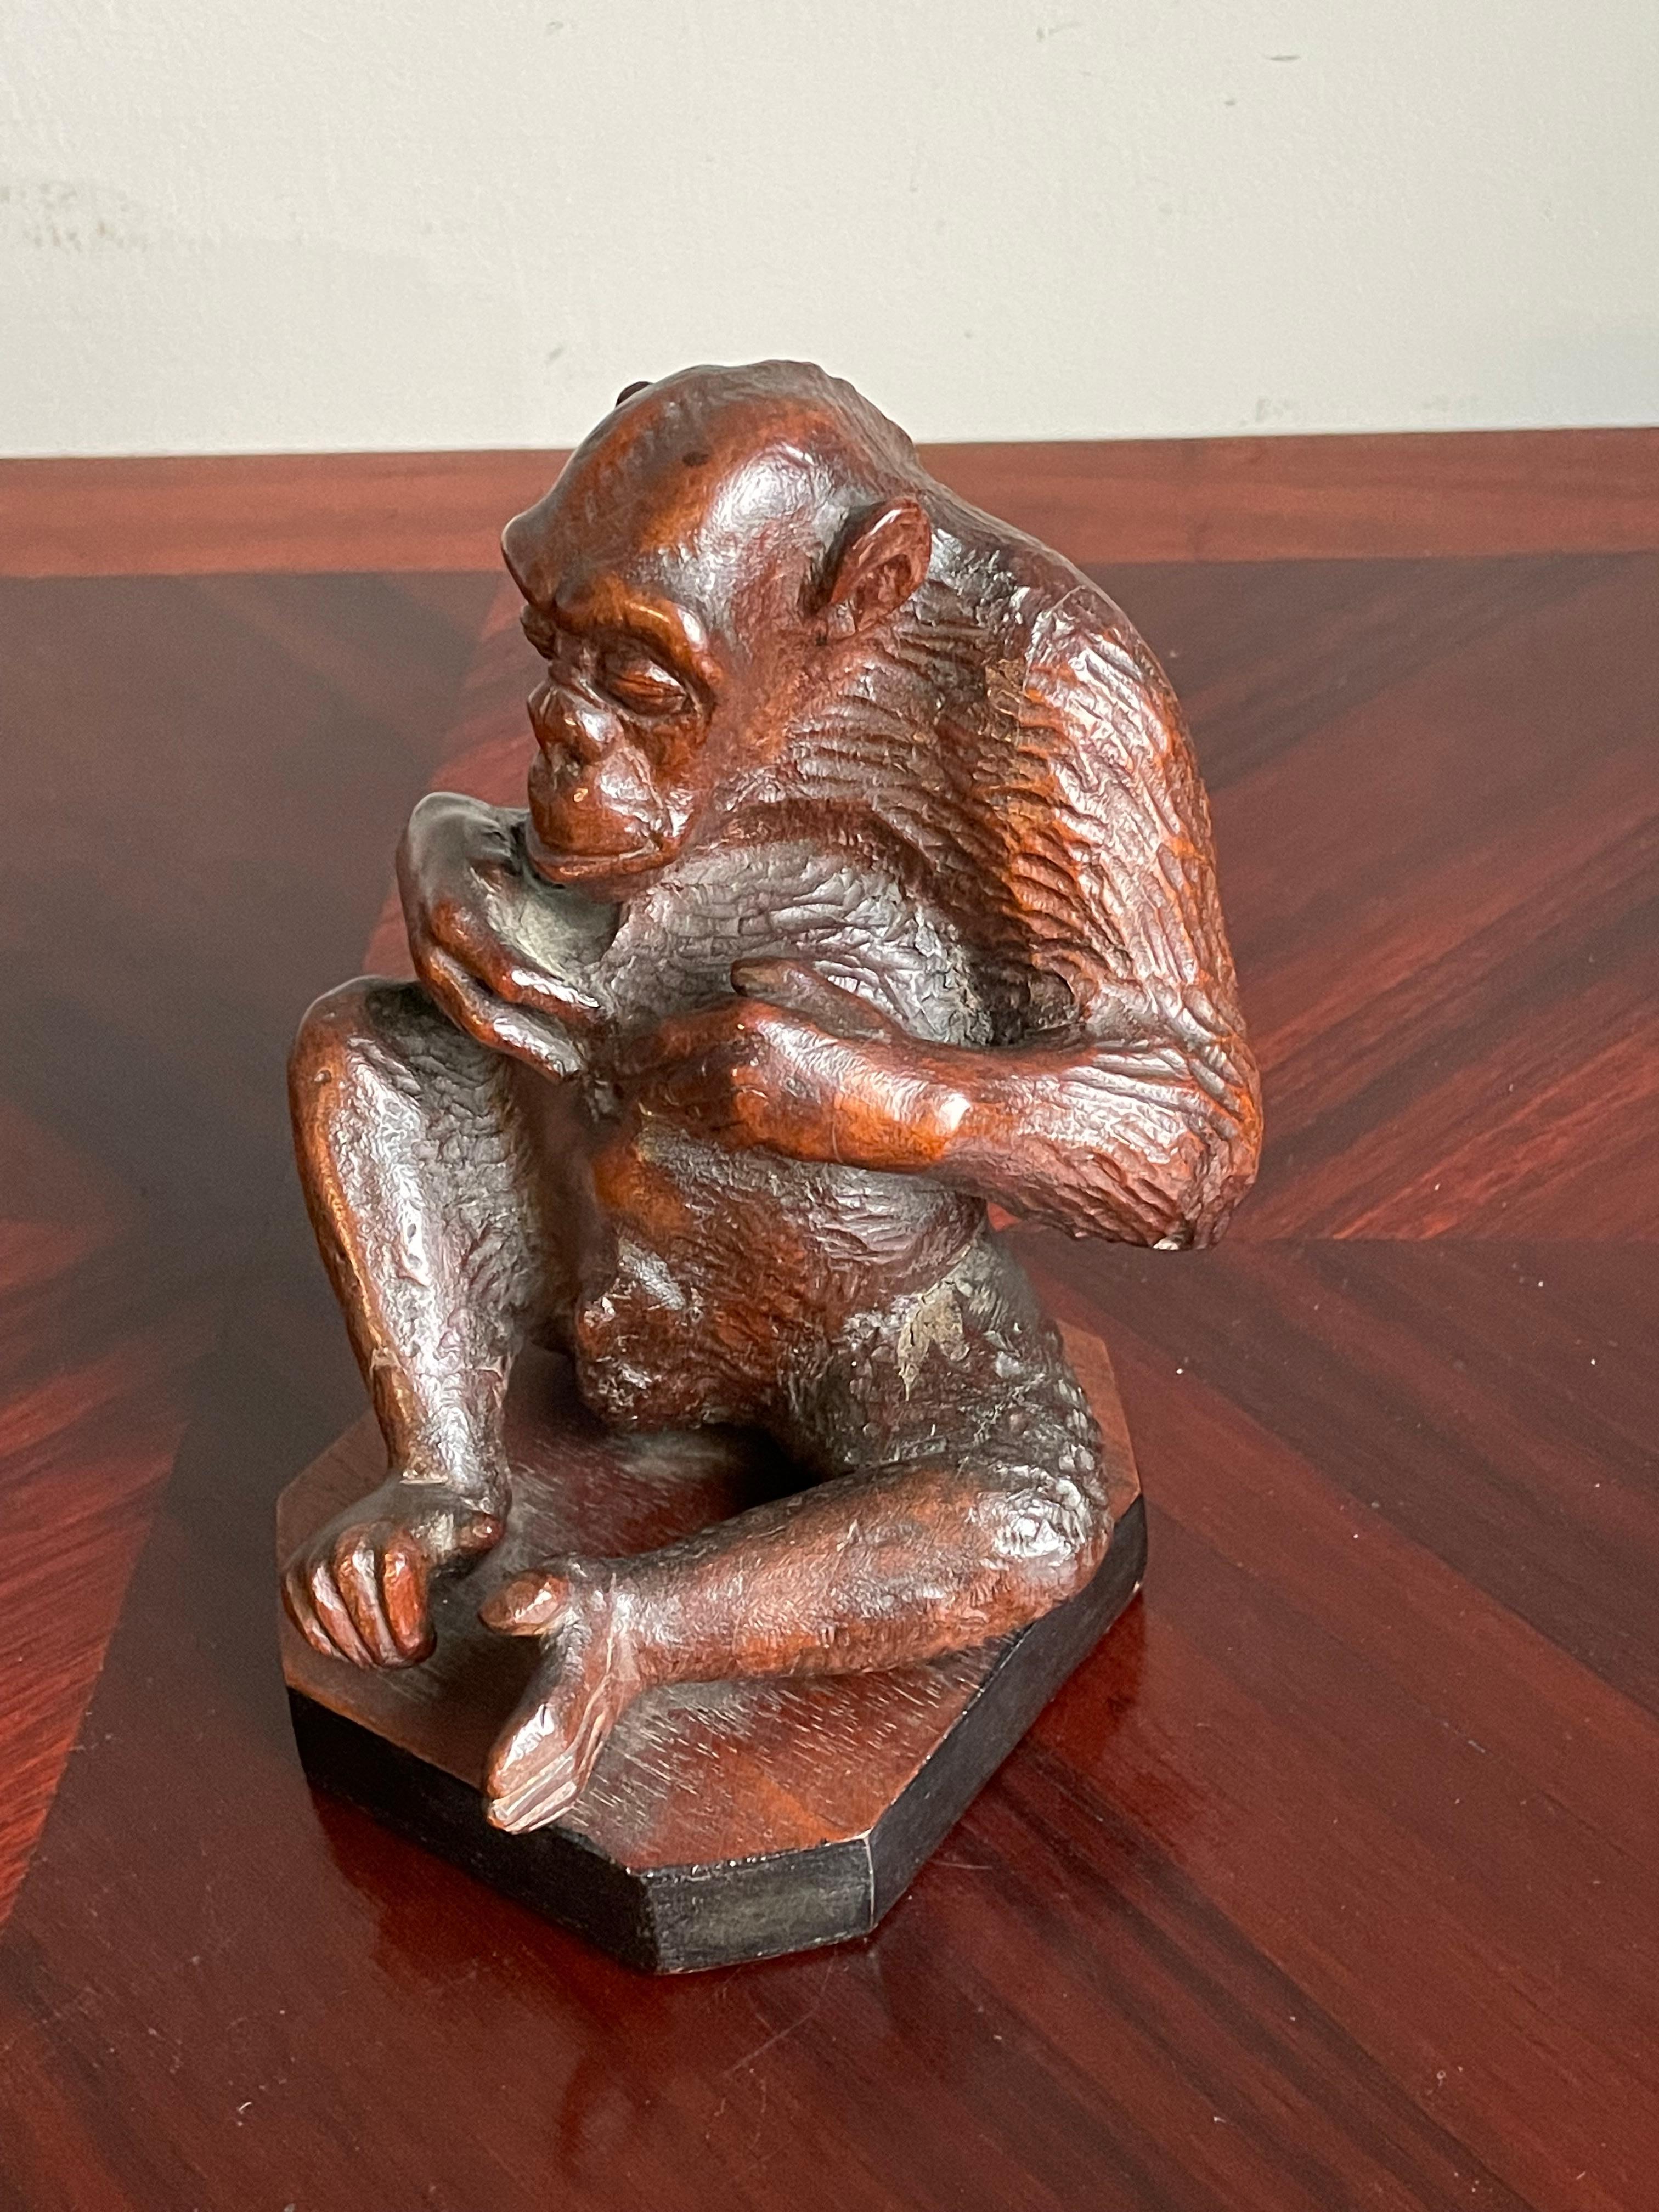 Blackened Rare & Meaningful Antique Hand Carved Nutwood, Navel Gazing Chimpanzee Sculpture For Sale